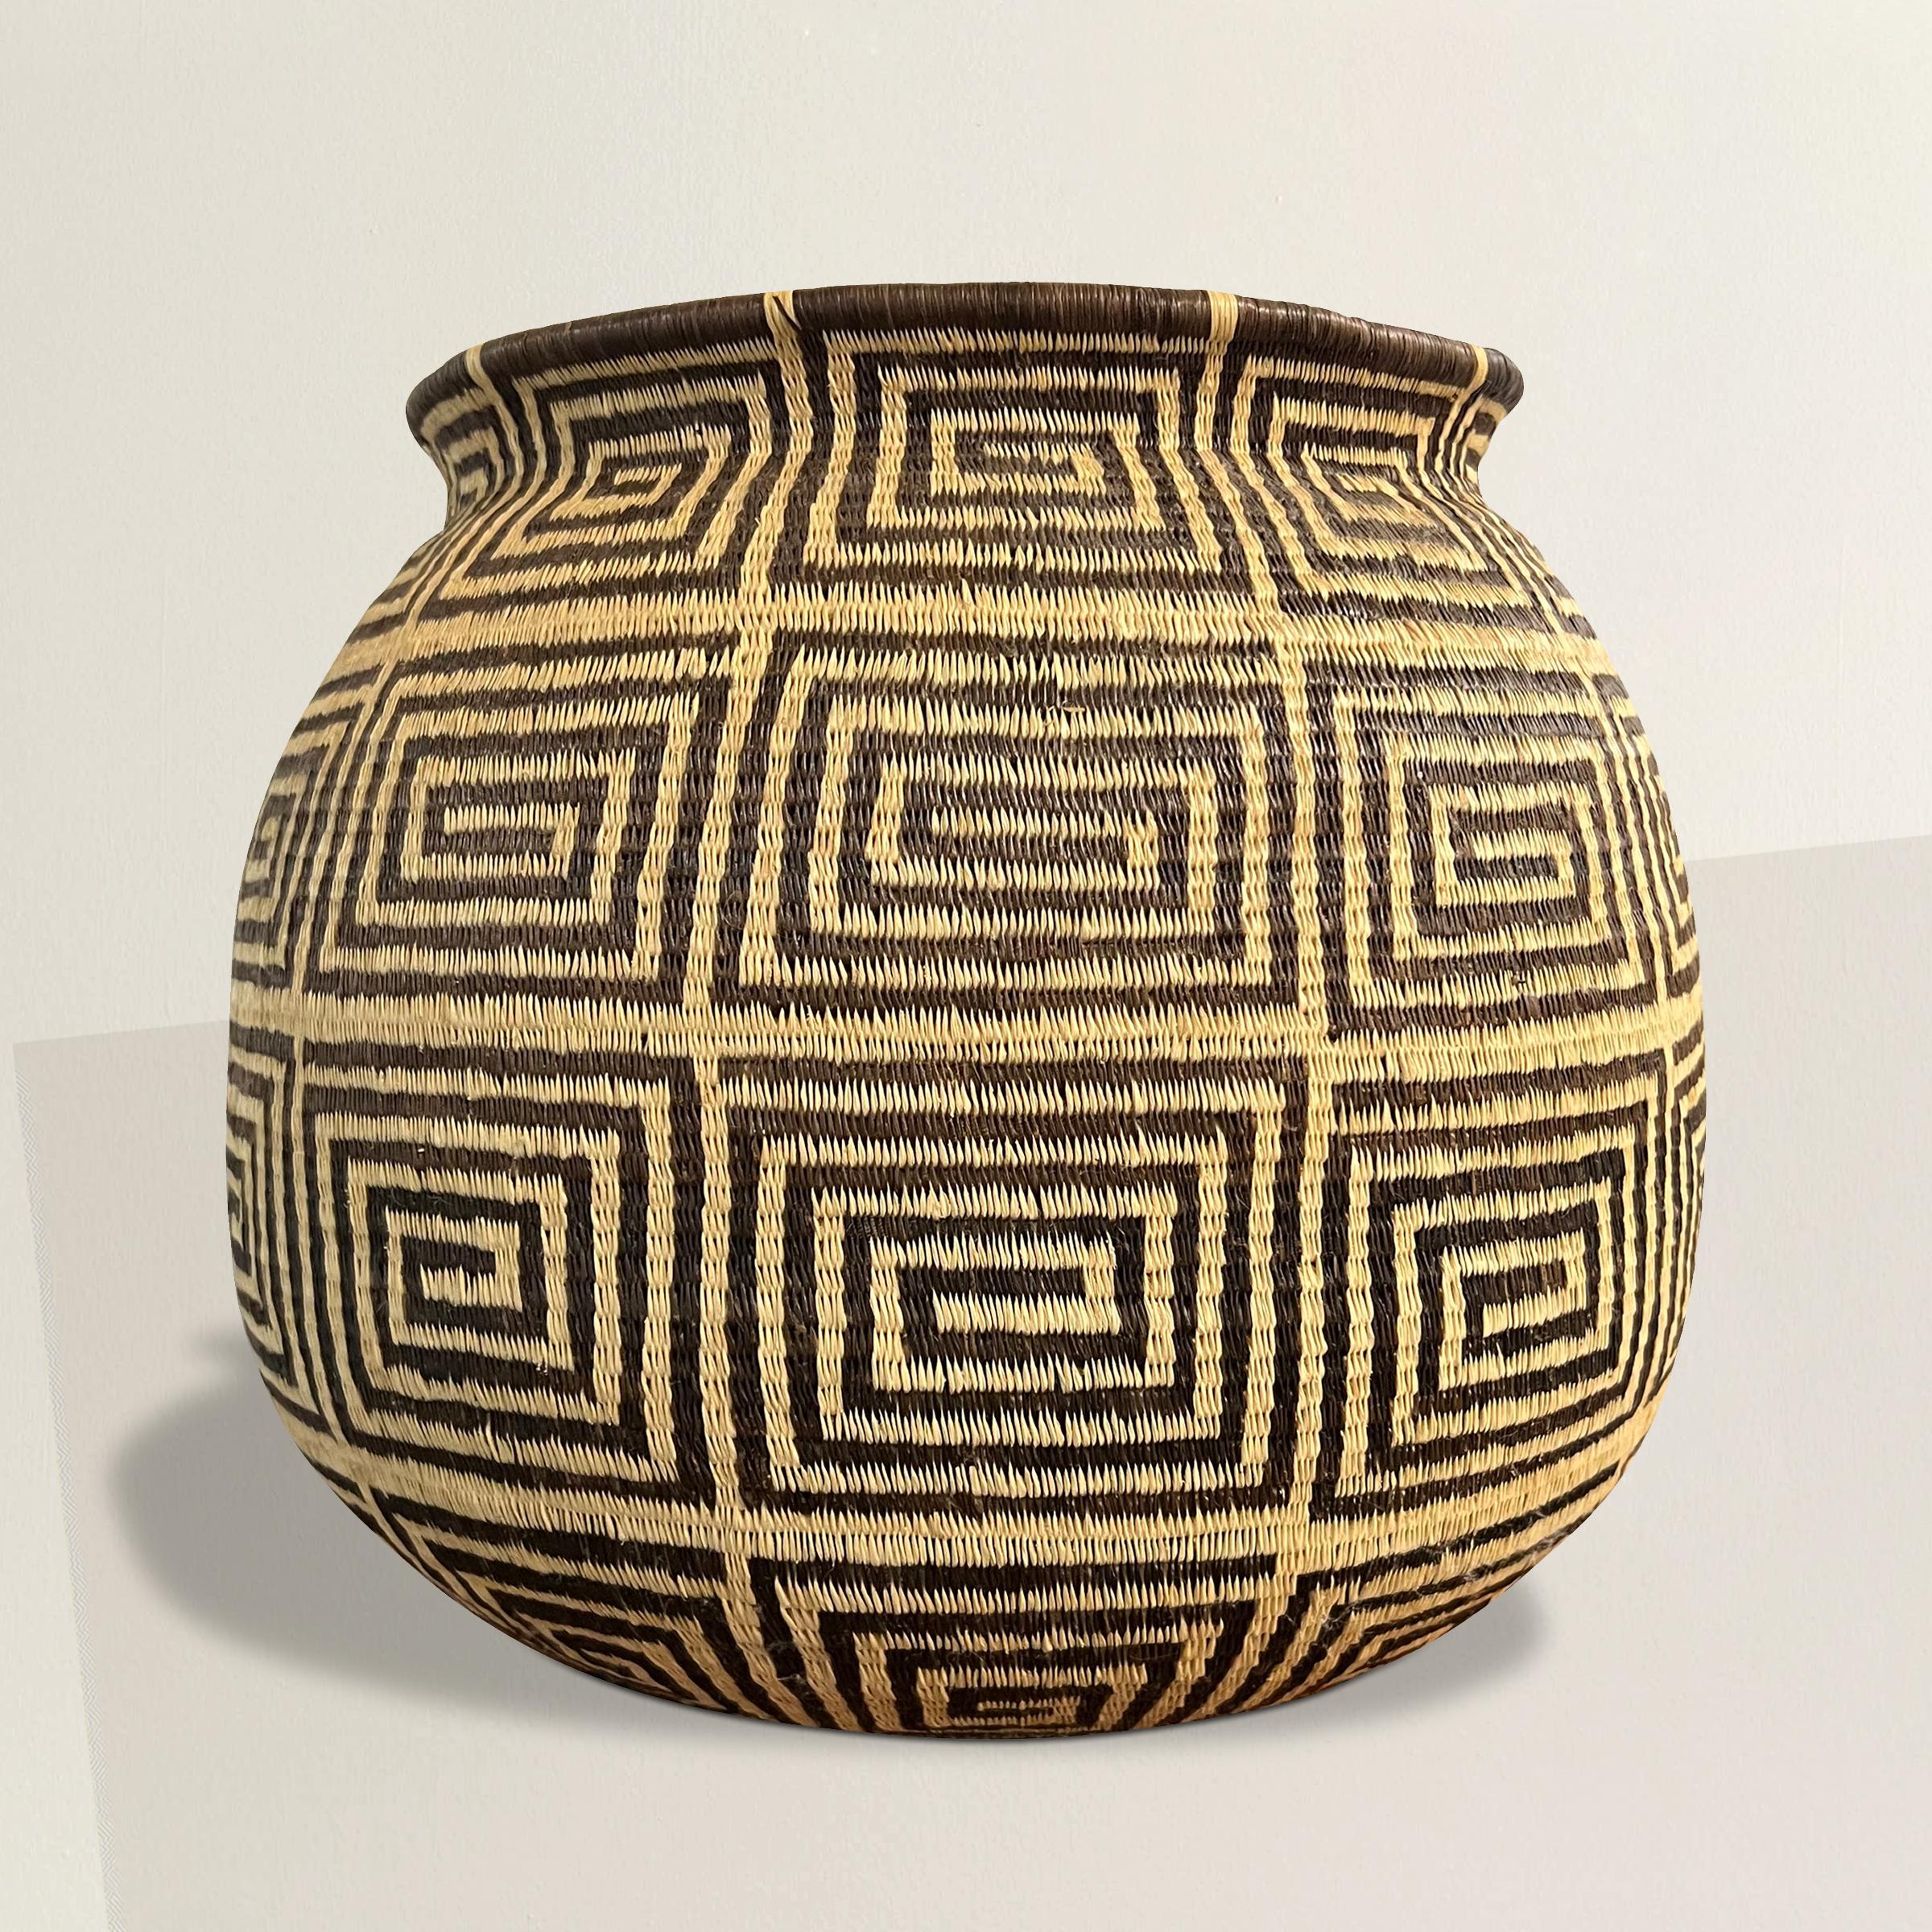 This extraordinary 20th century Emberá-Wounaan basket is a testament to the remarkable craftsmanship of the indigenous Emberá-Wounaan people of Panama and Colombia. Woven with unparalleled skill from natural palm leaves, its tightly coiled structure